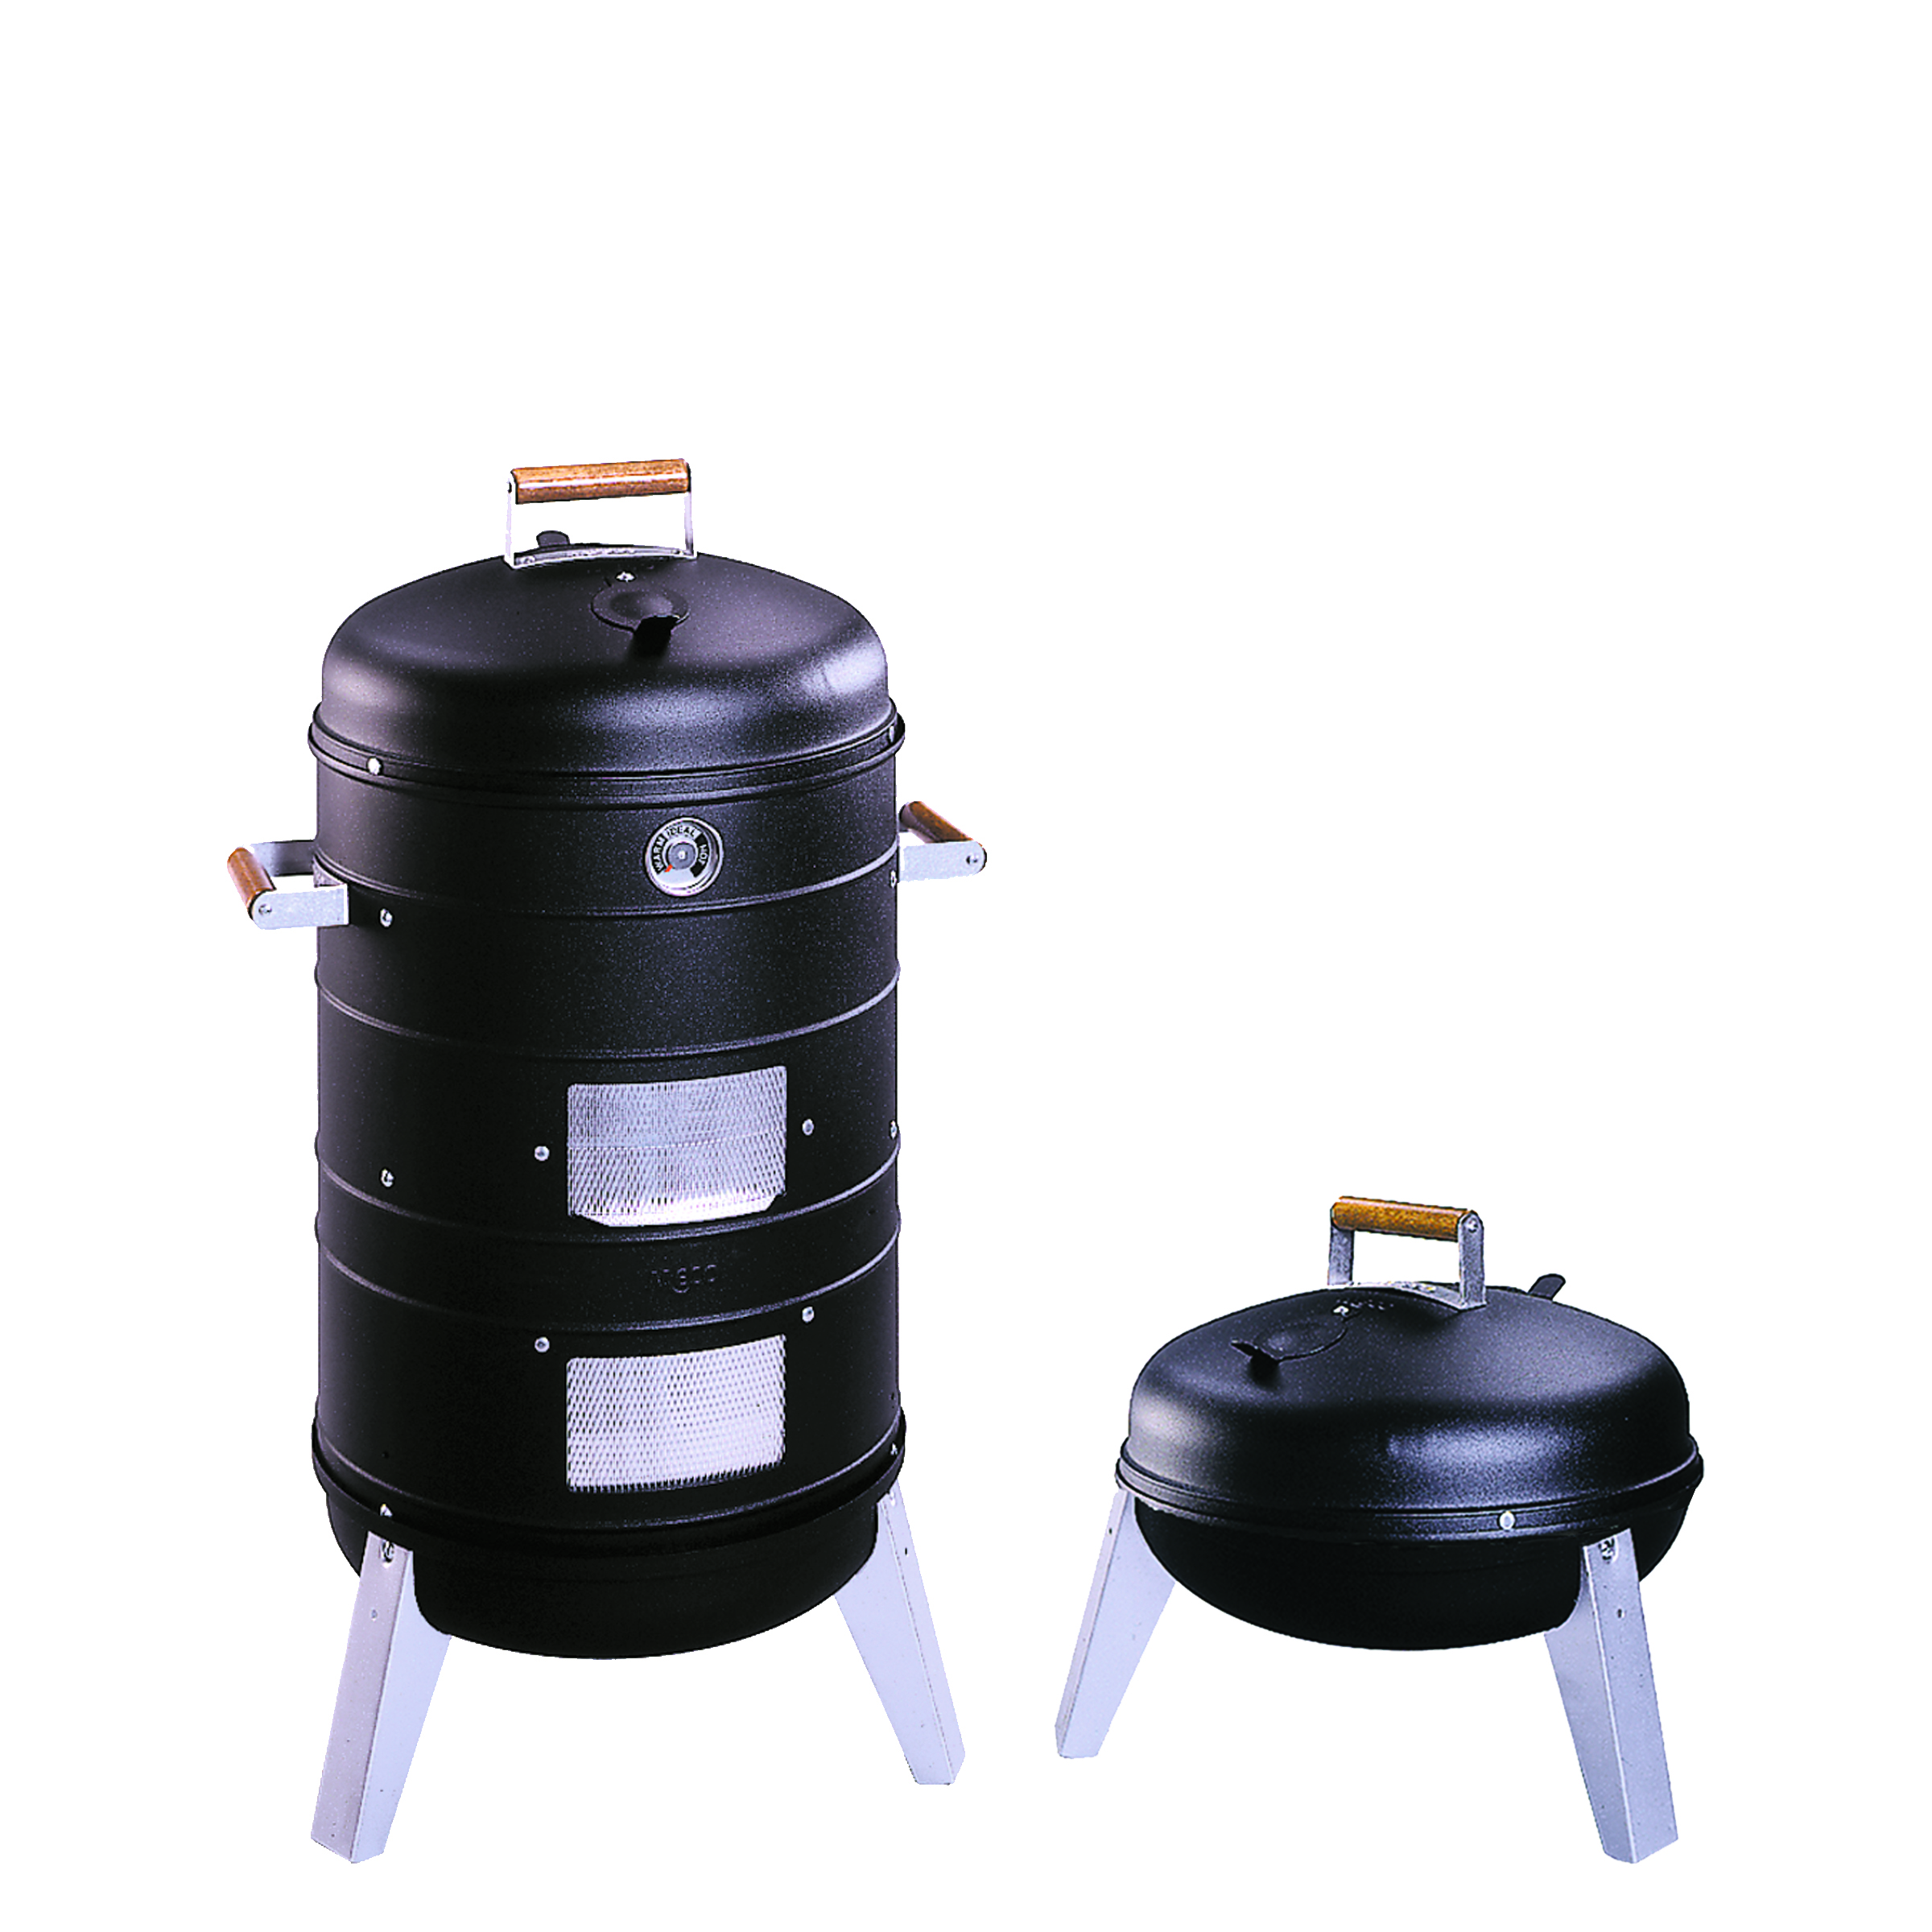 Americana Charcoal 2-In-1 Combination Water Smoker - image 1 of 10